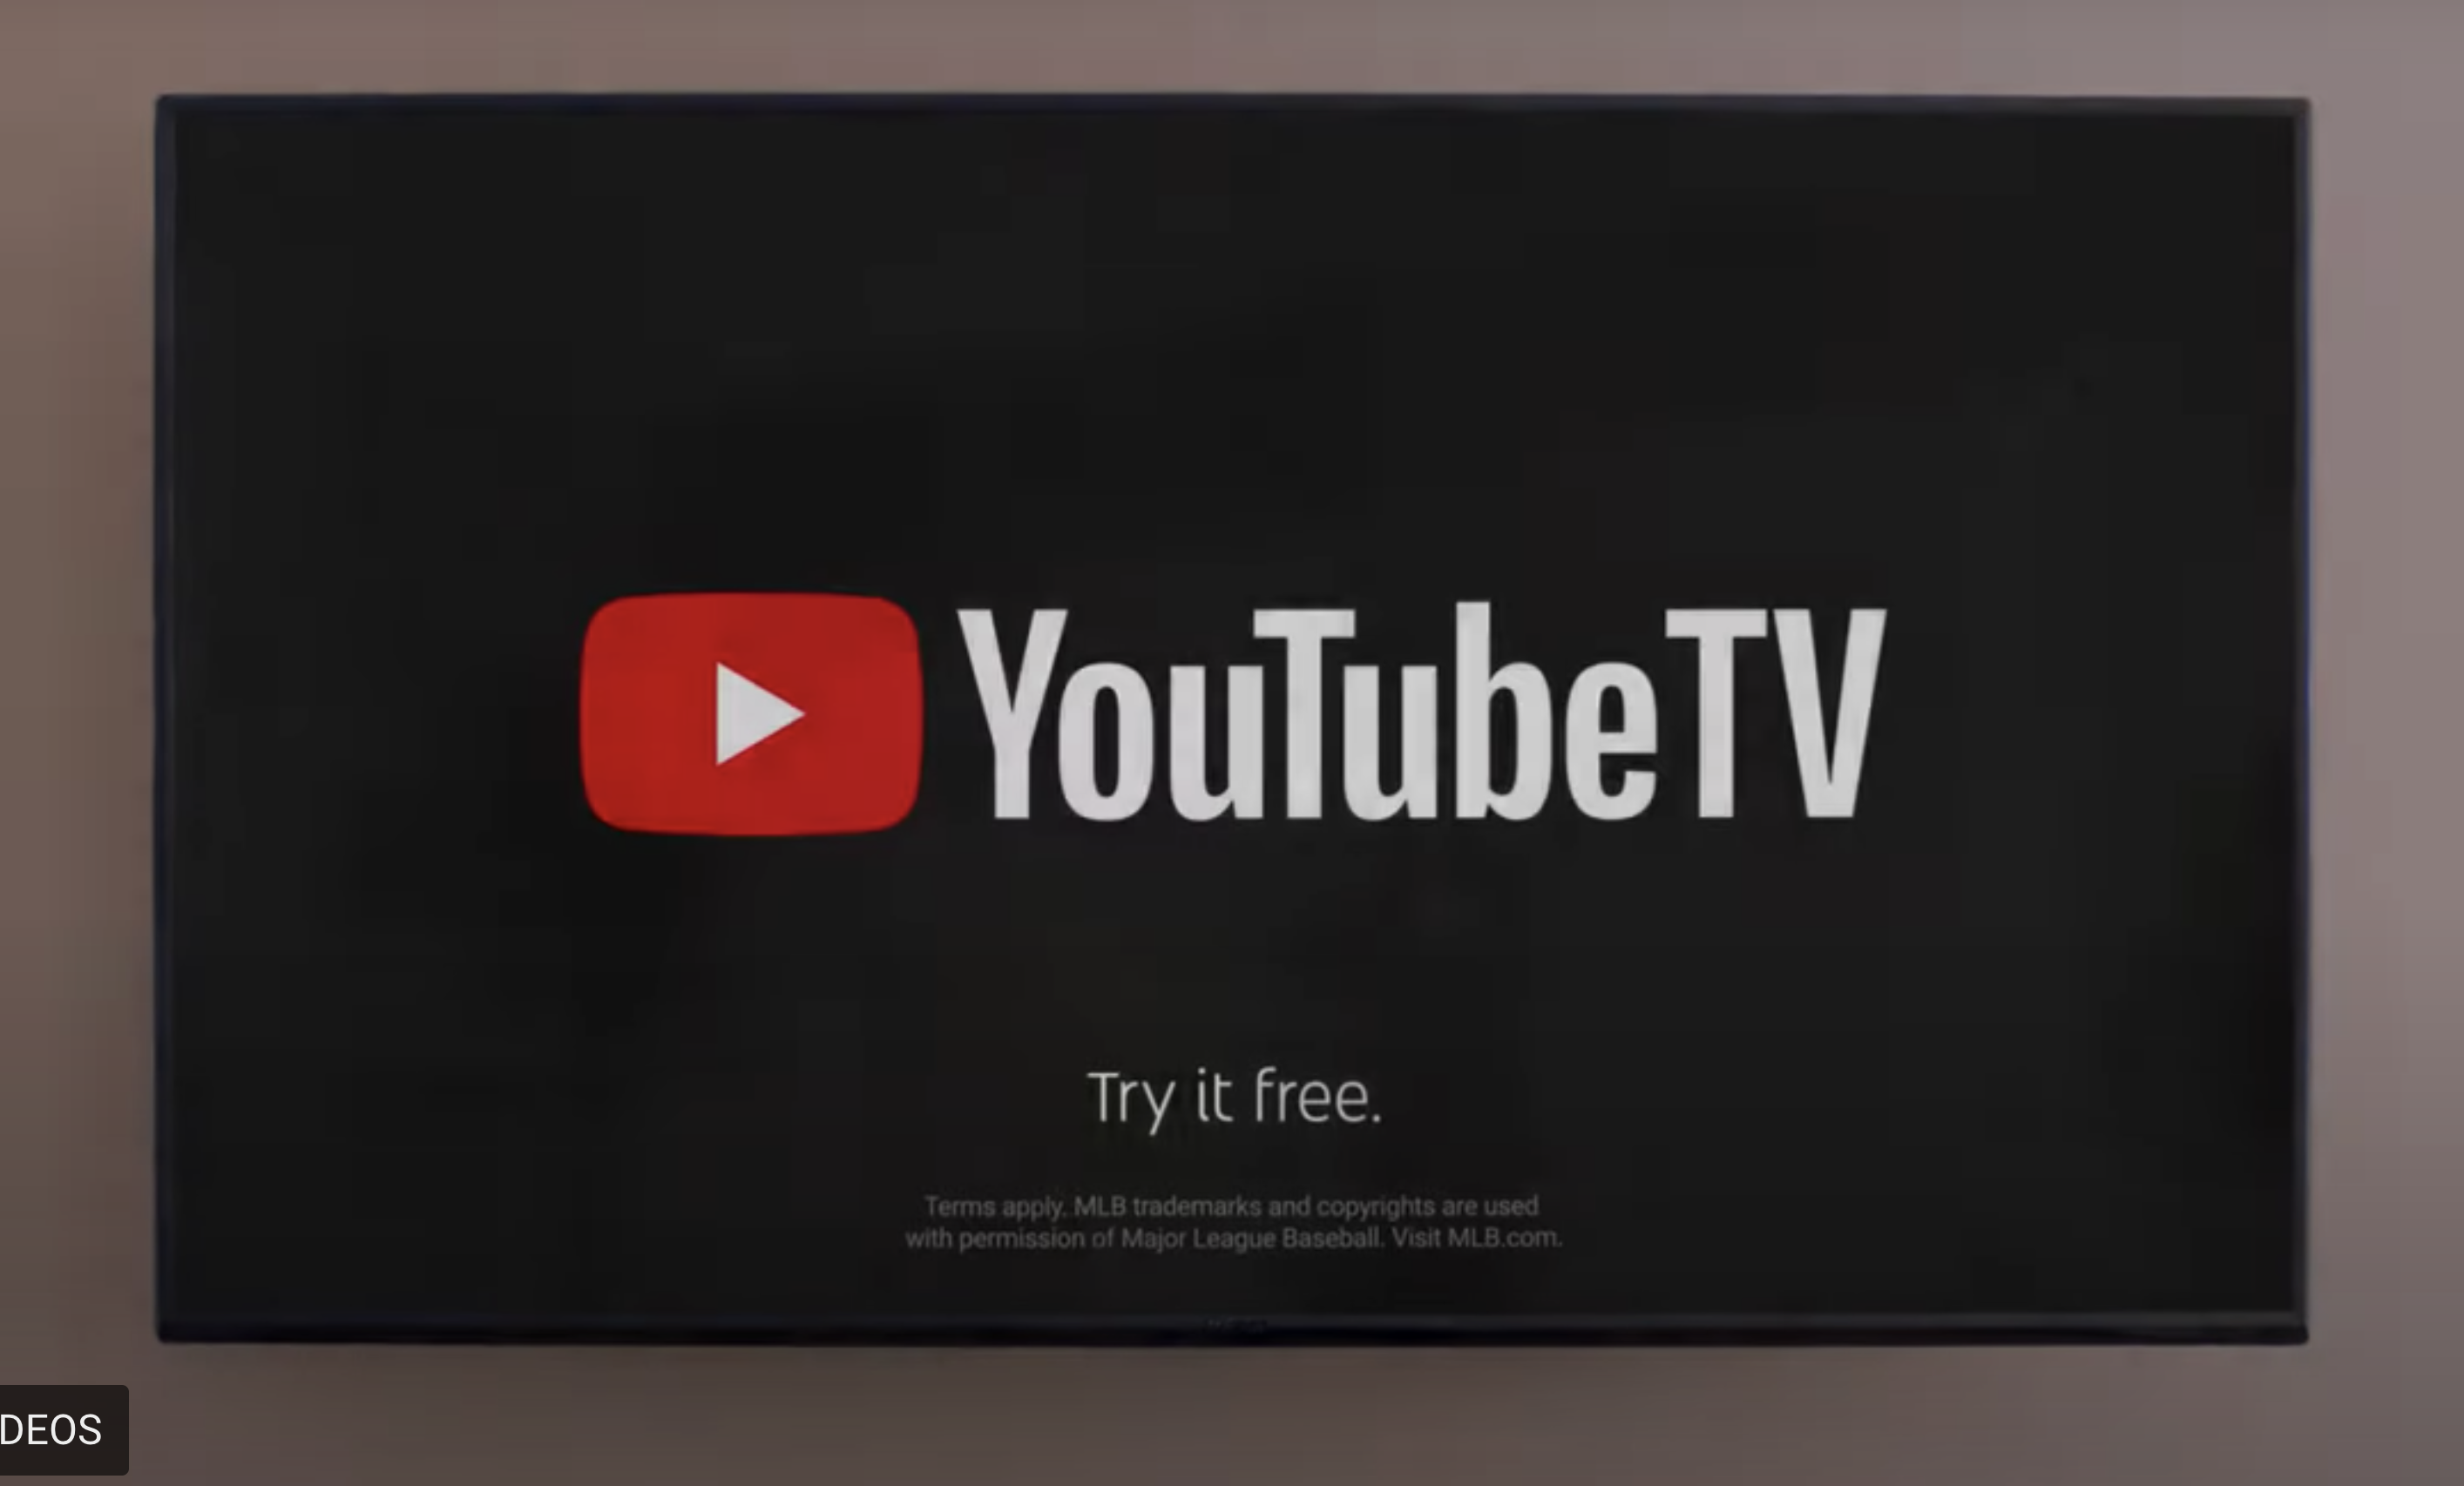 Youtube Tv To Gain 14 More Viacomcbs Channels In Expanded